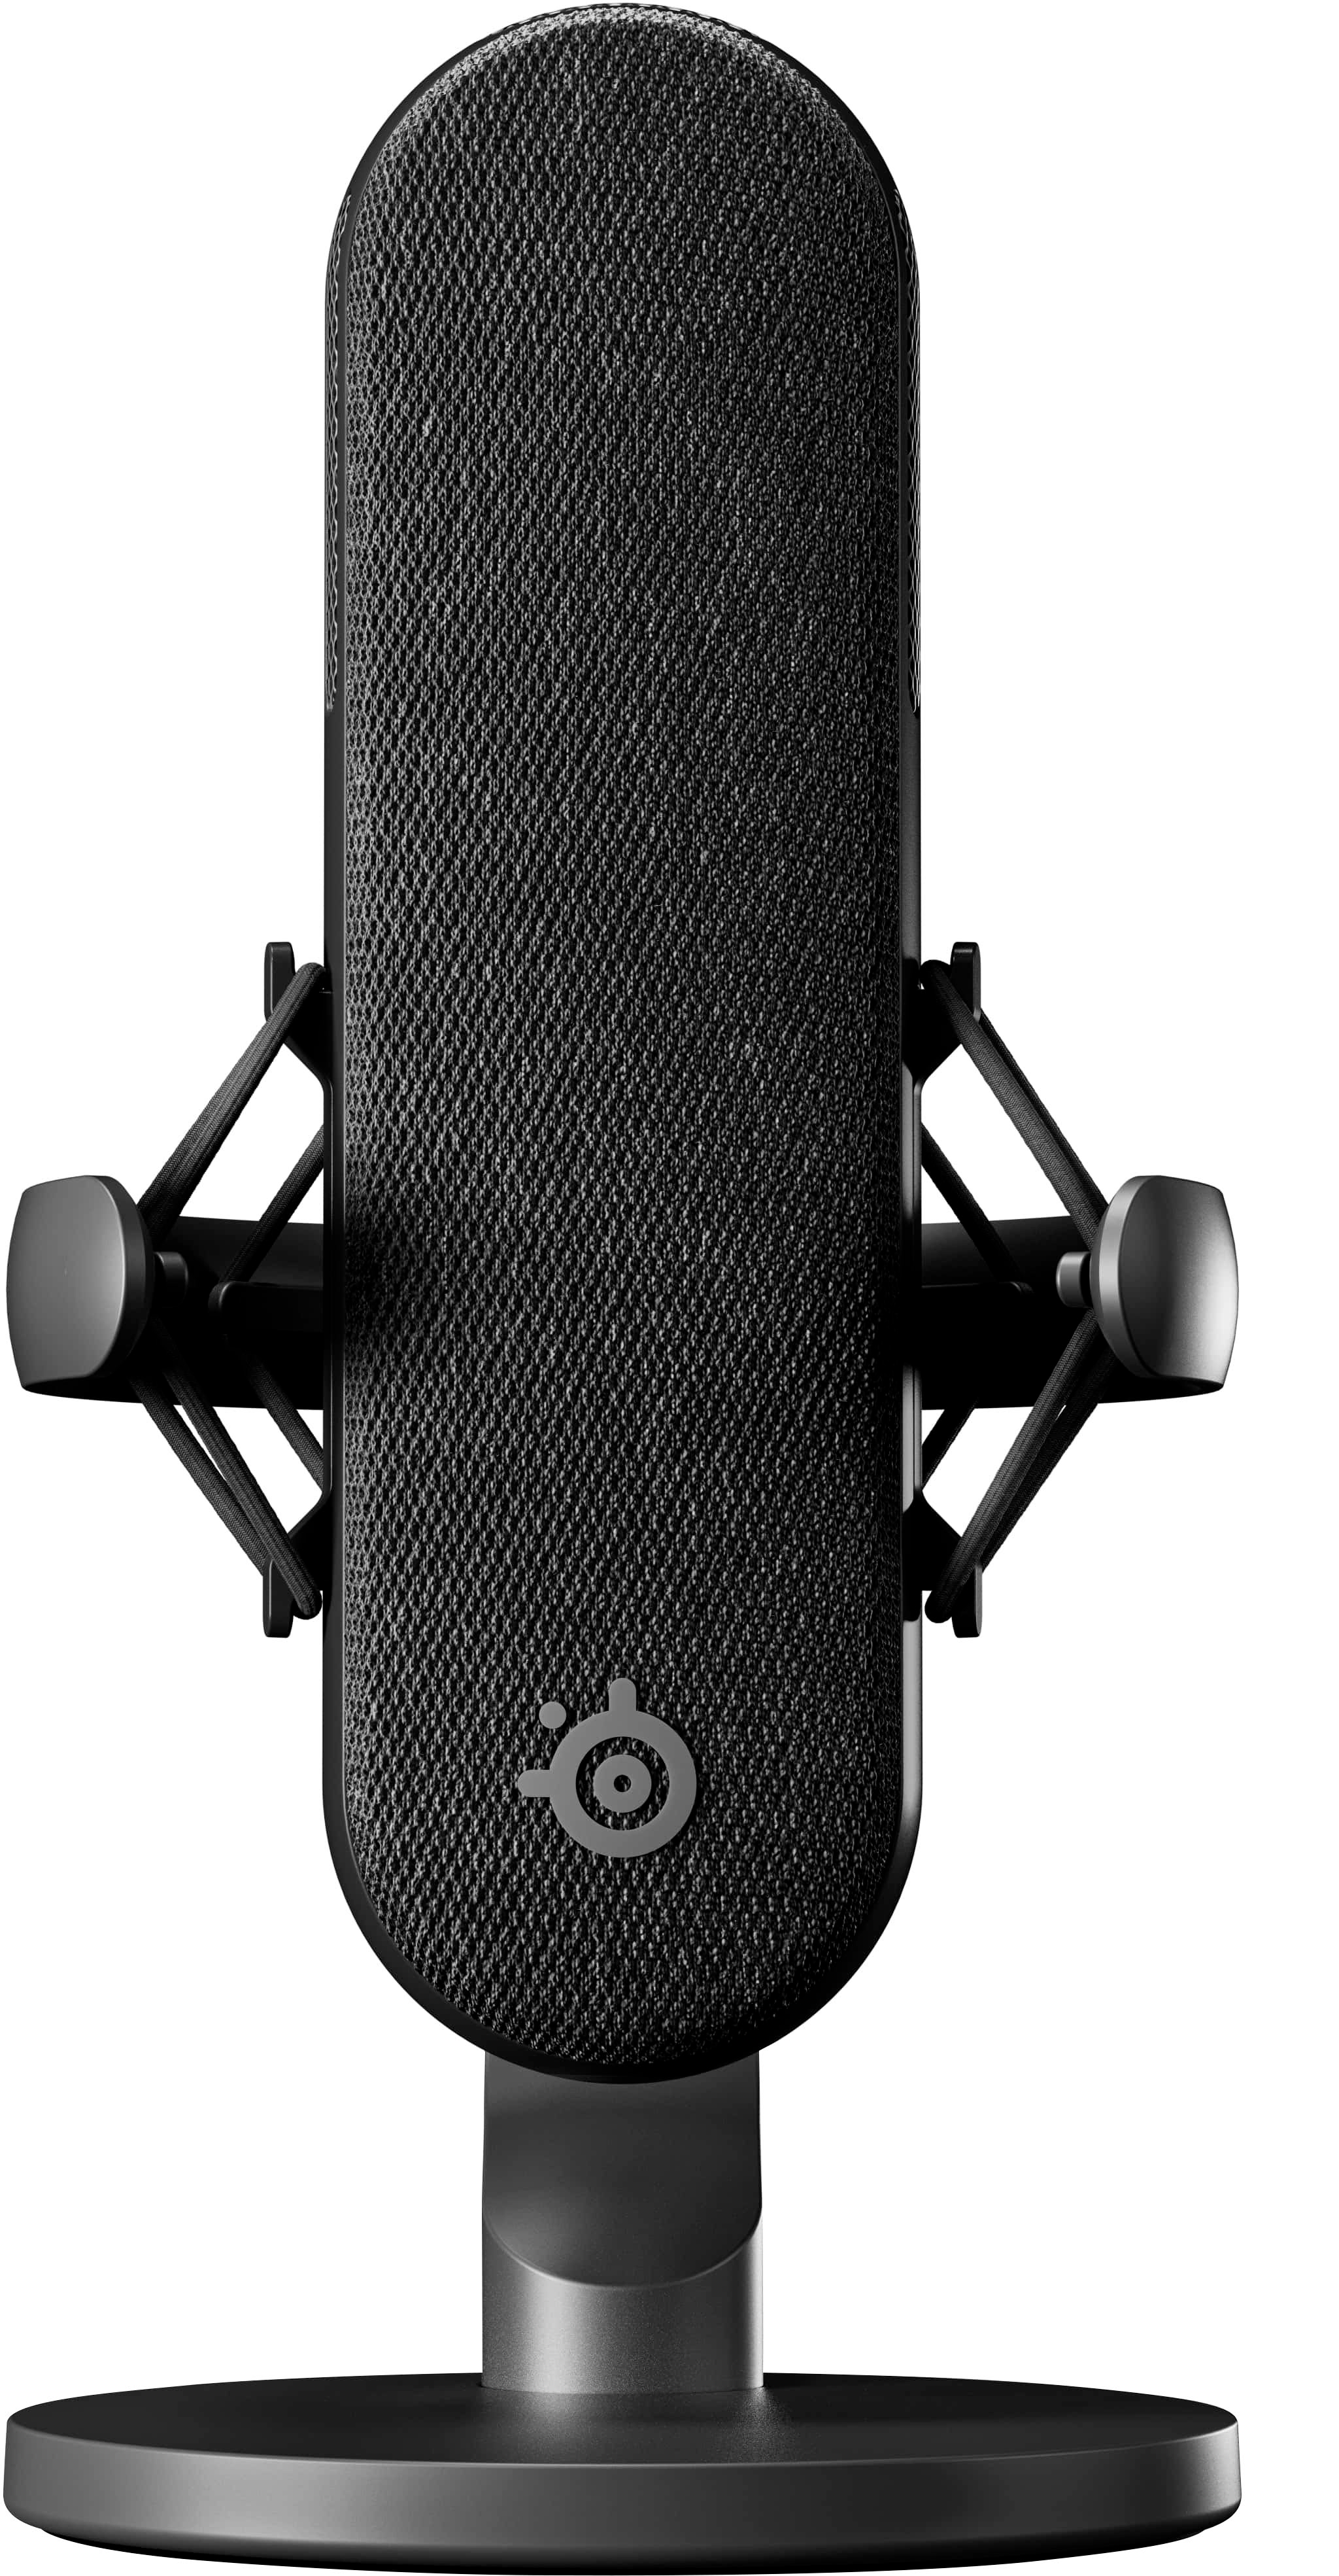 Angle View: SteelSeries Alias Pro XLR Microphone